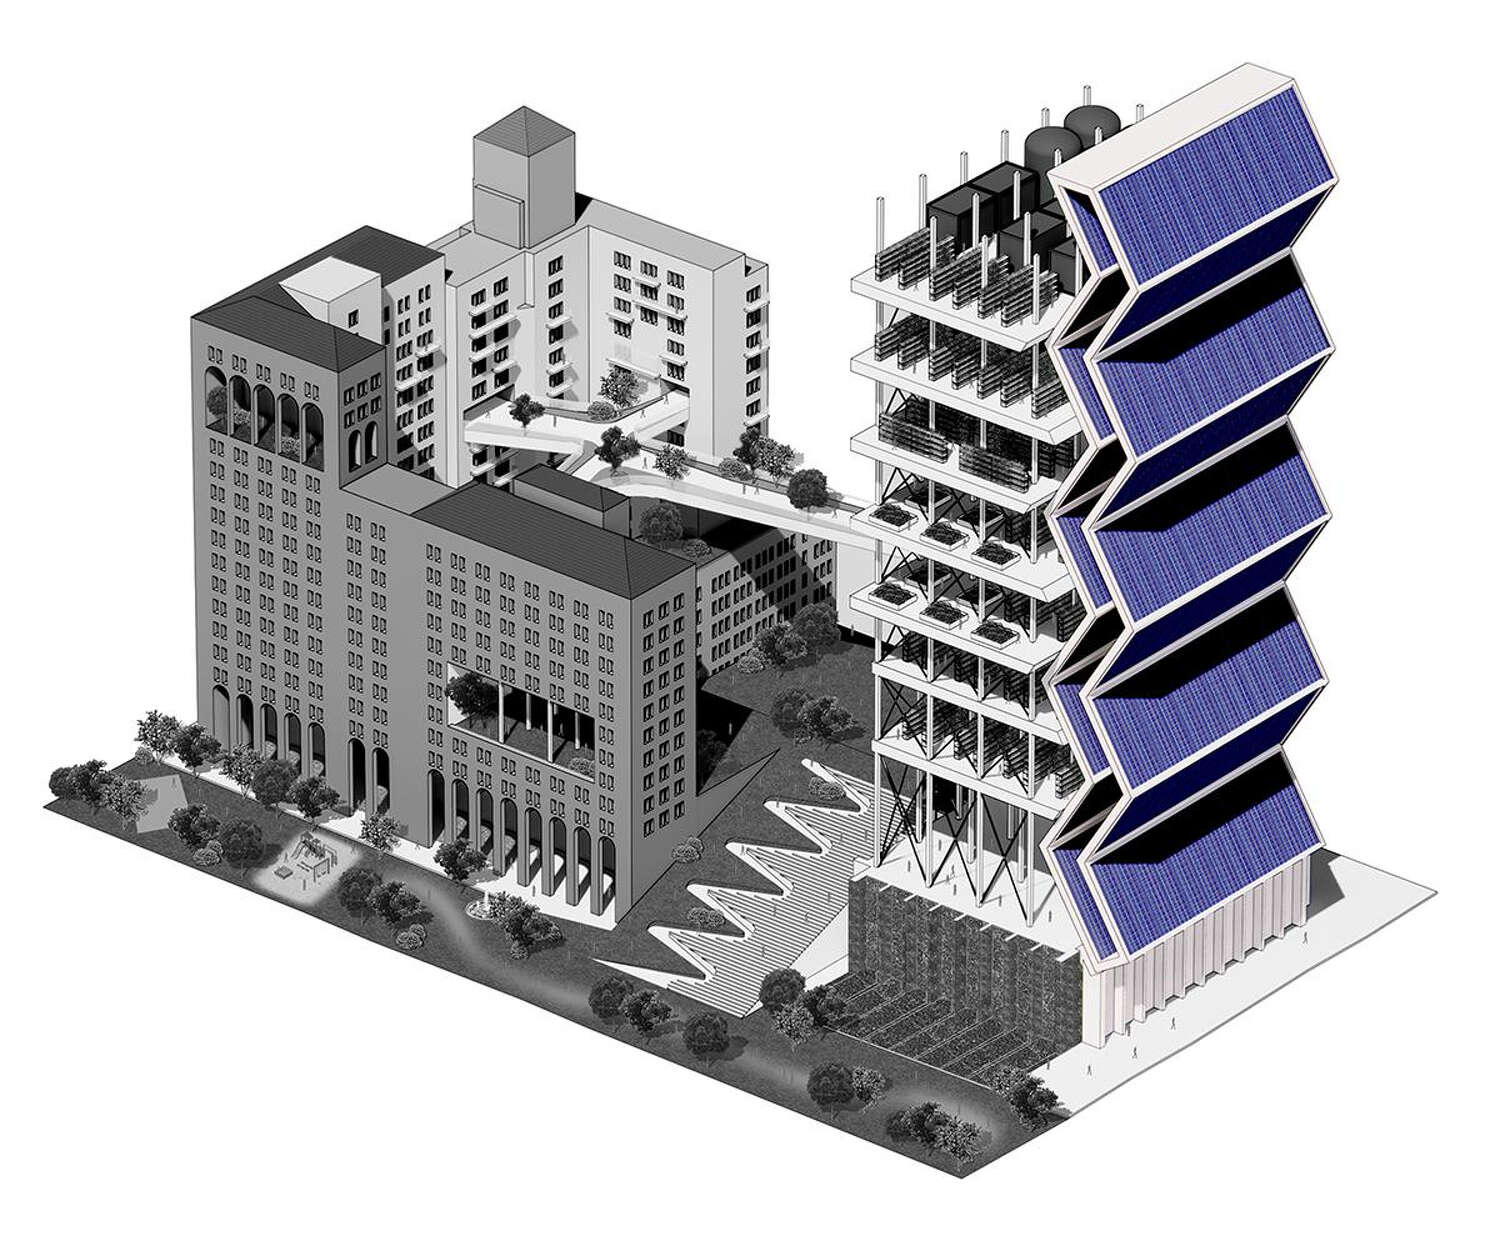 In the foreground of the rendering, the tower of solar panels is highlighted.